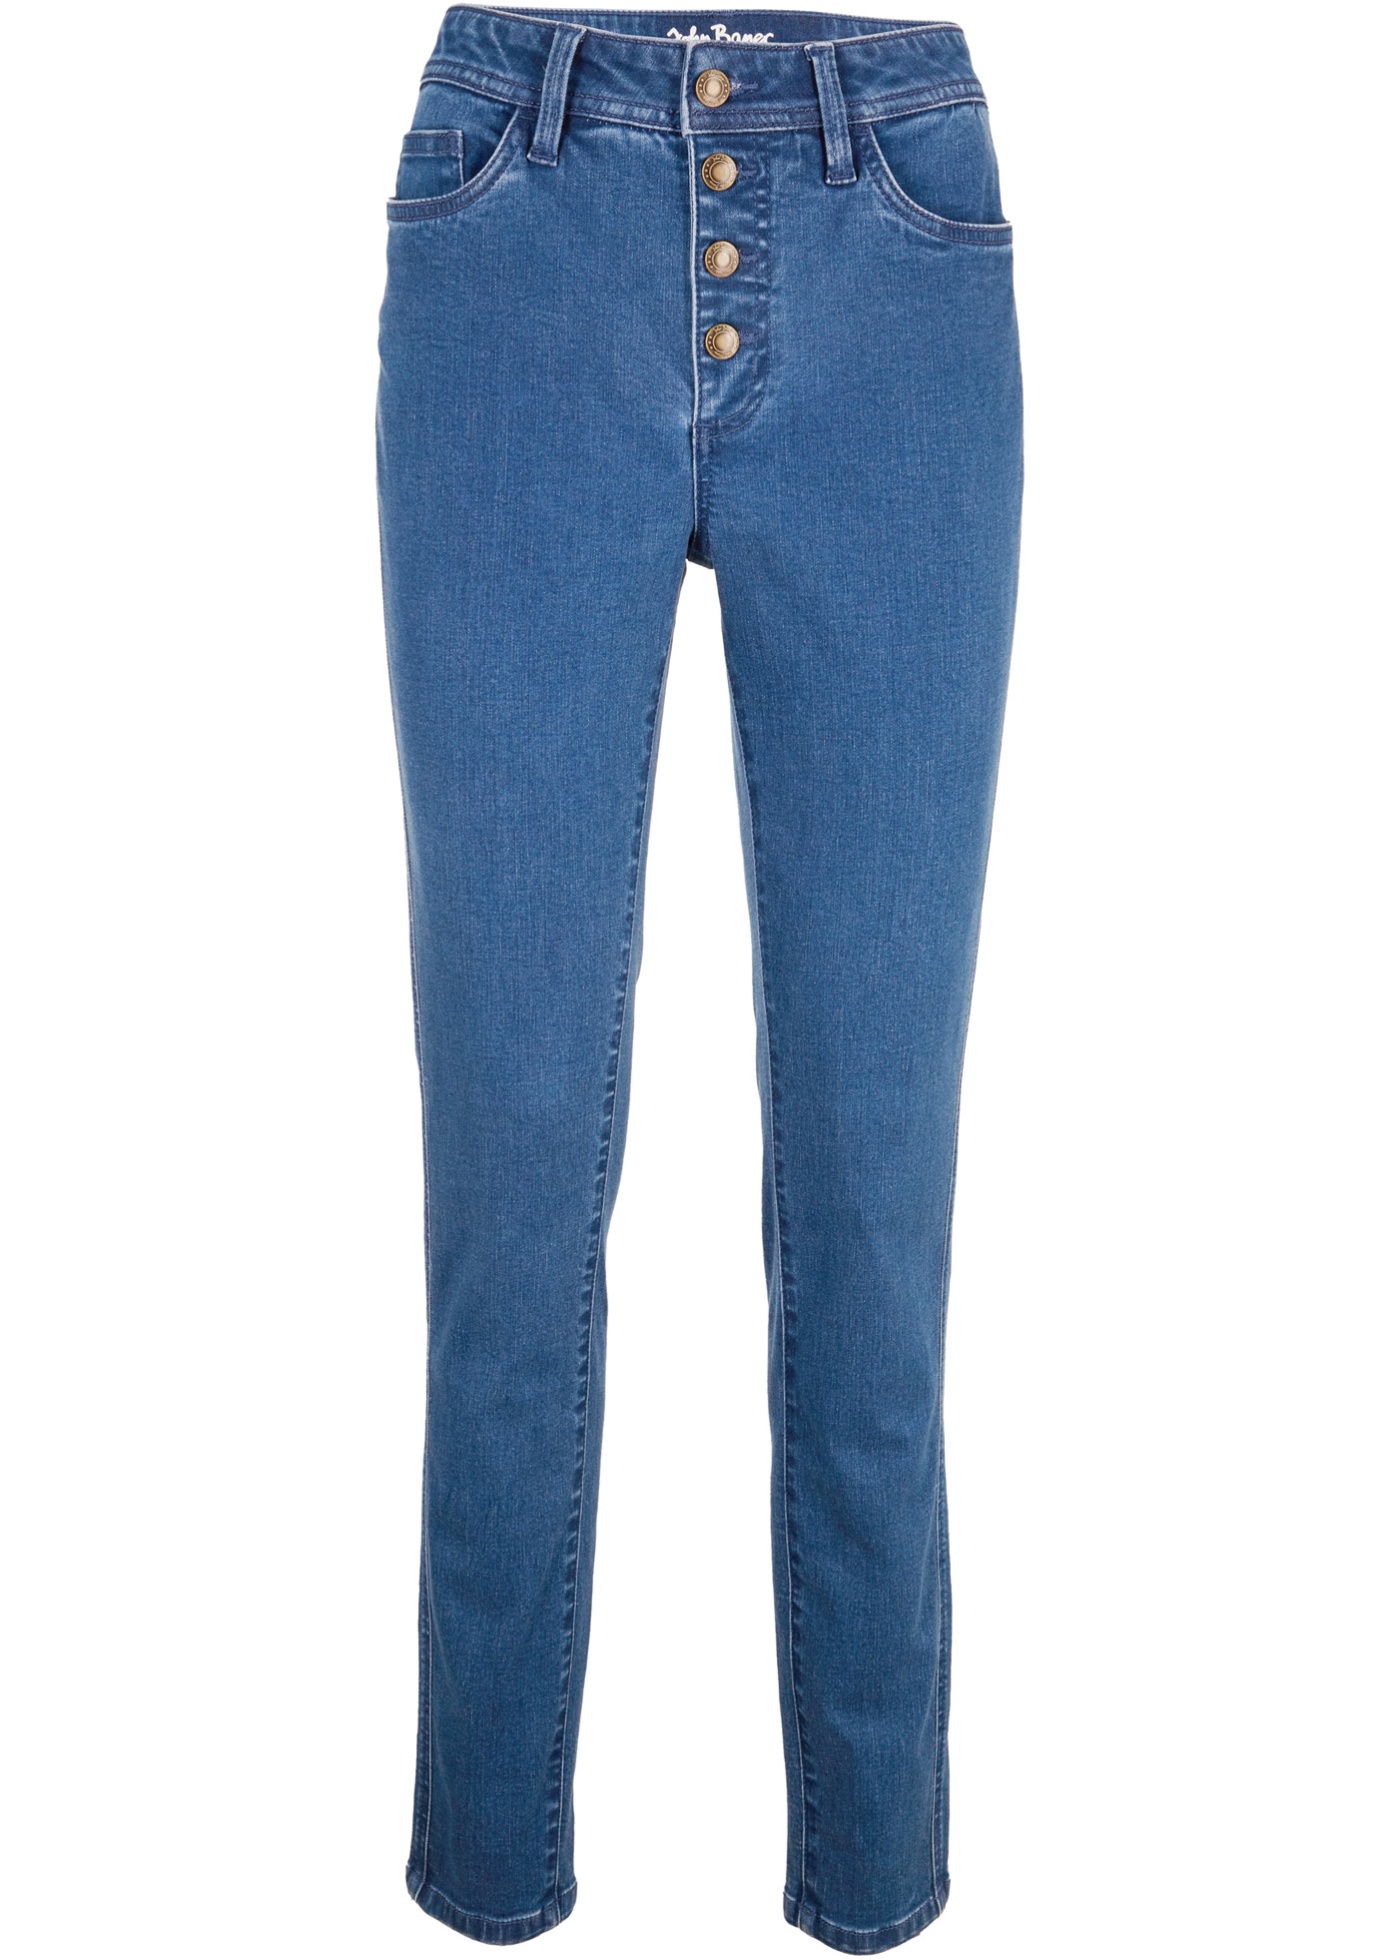 Corrigerende push up jeans, skinny, high rise